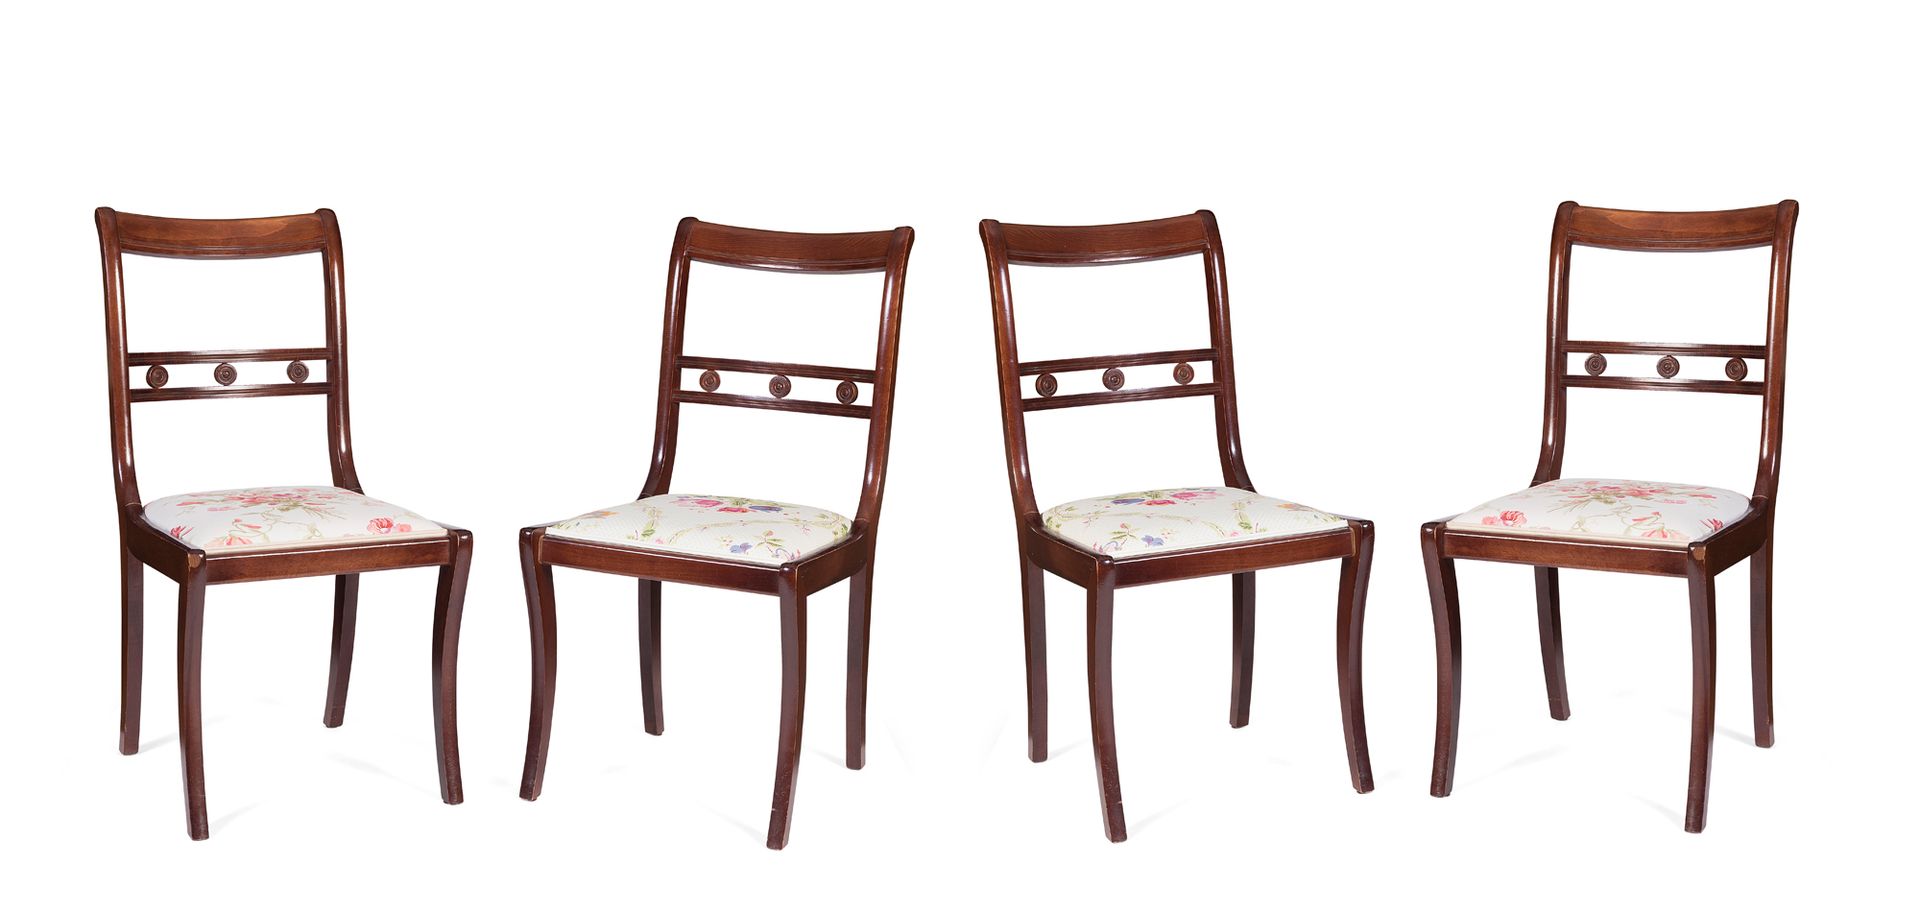 Null Suite of four chairs in molded and varnished wood. The openwork backs with &hellip;